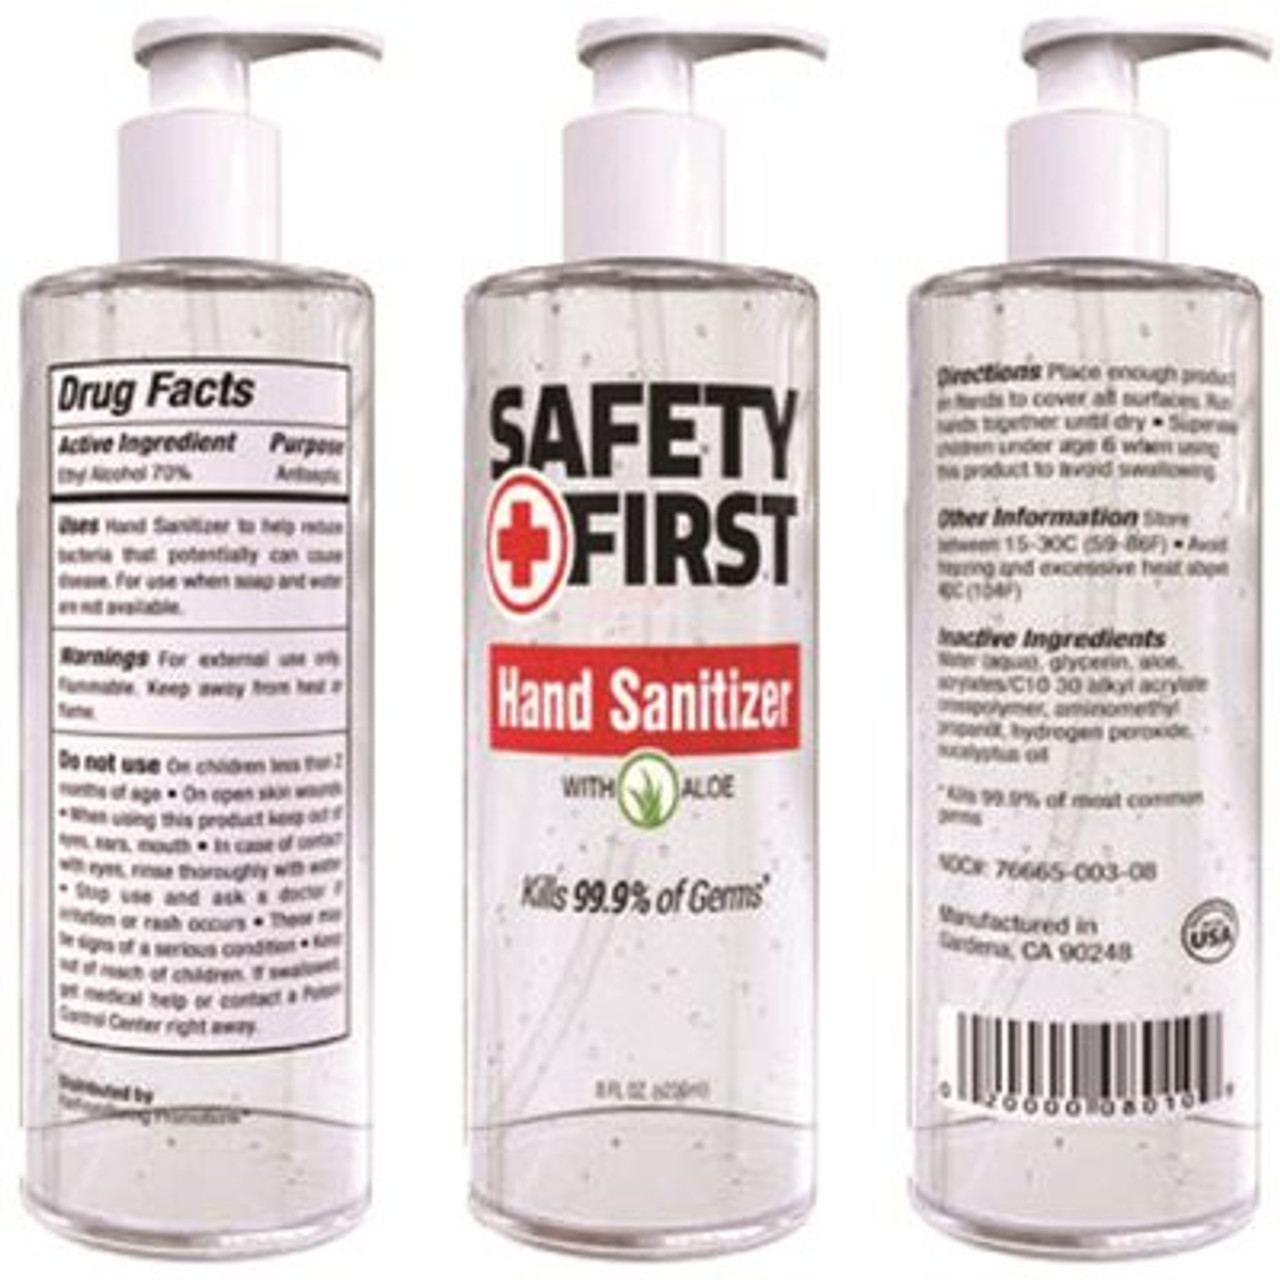 SAFETY WERCS 8 oz. Hand Sanitizer |By the Pallet| 